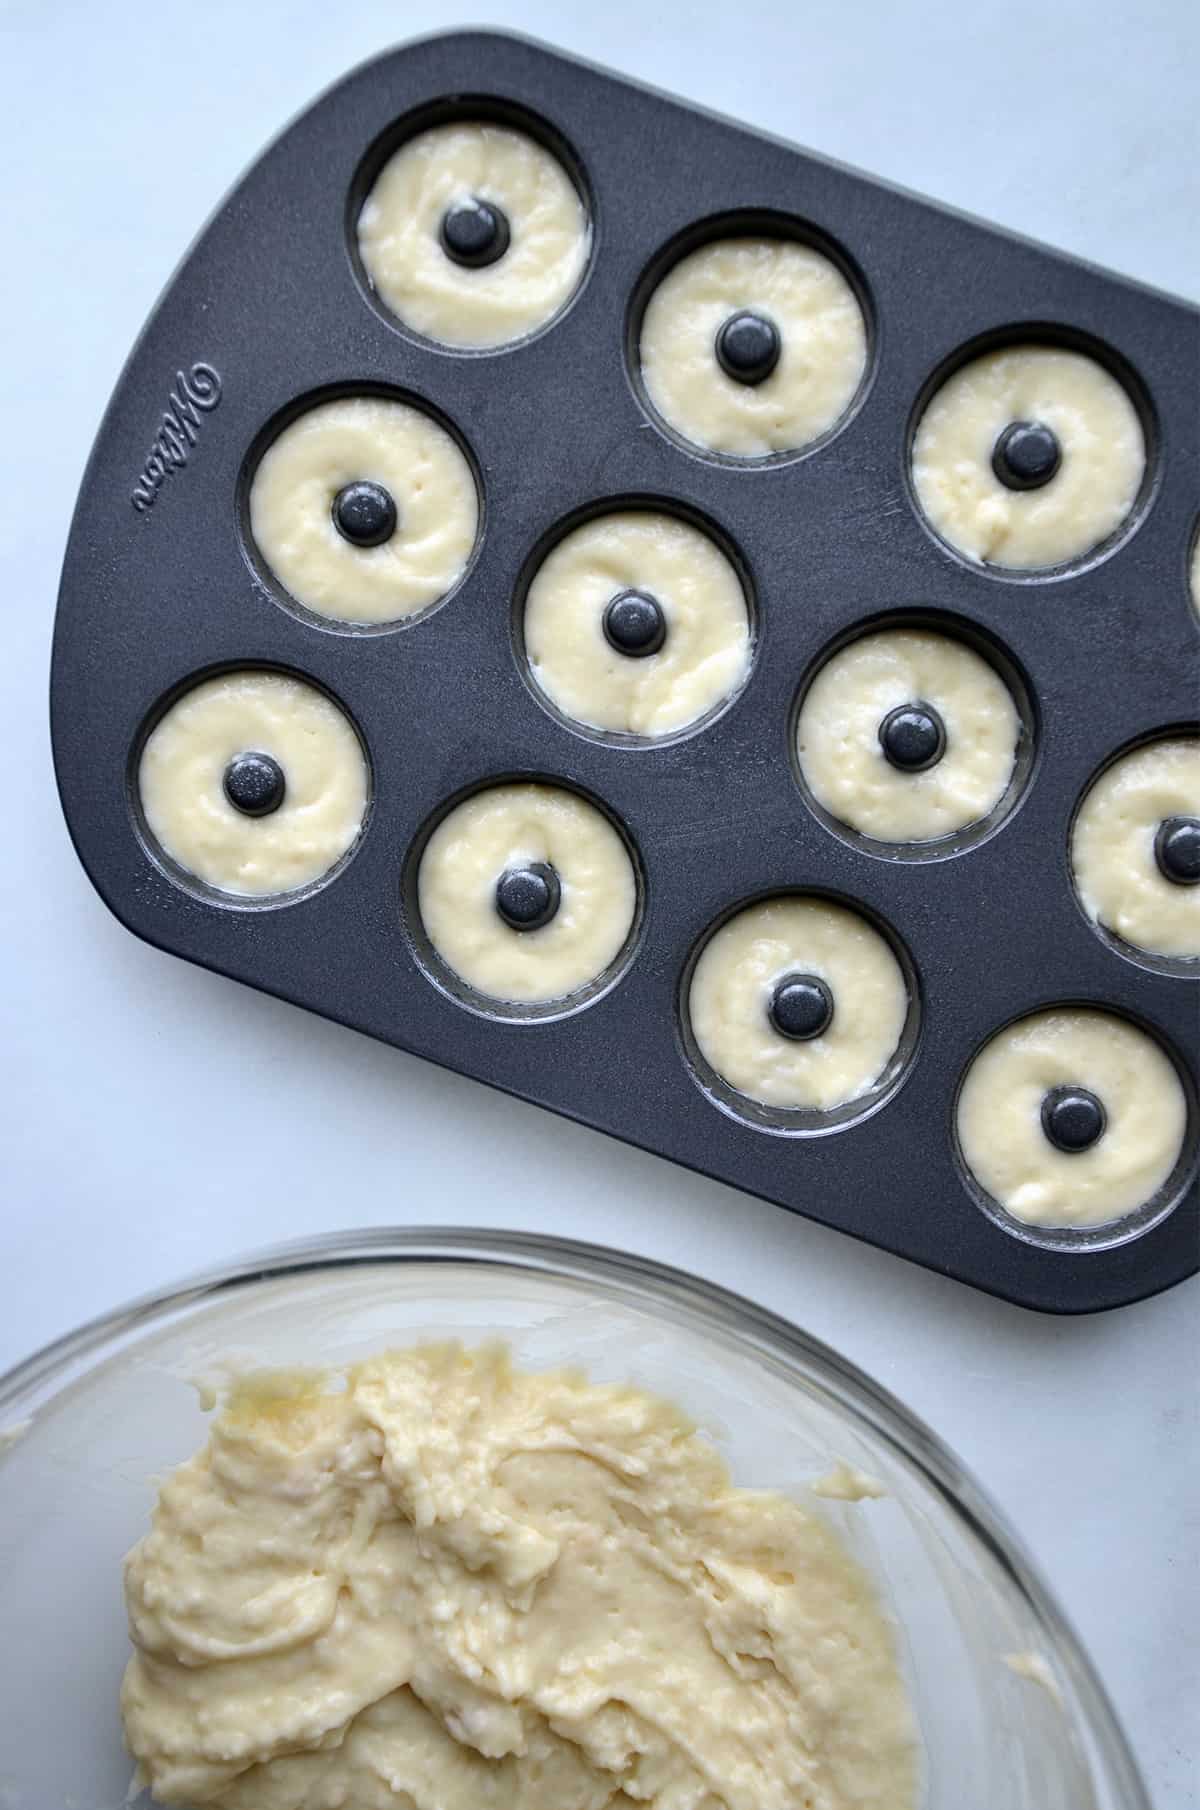 A mini doughnut pan filled with batter. A large glass mixing bowl with doughnut batter is beside the pan.